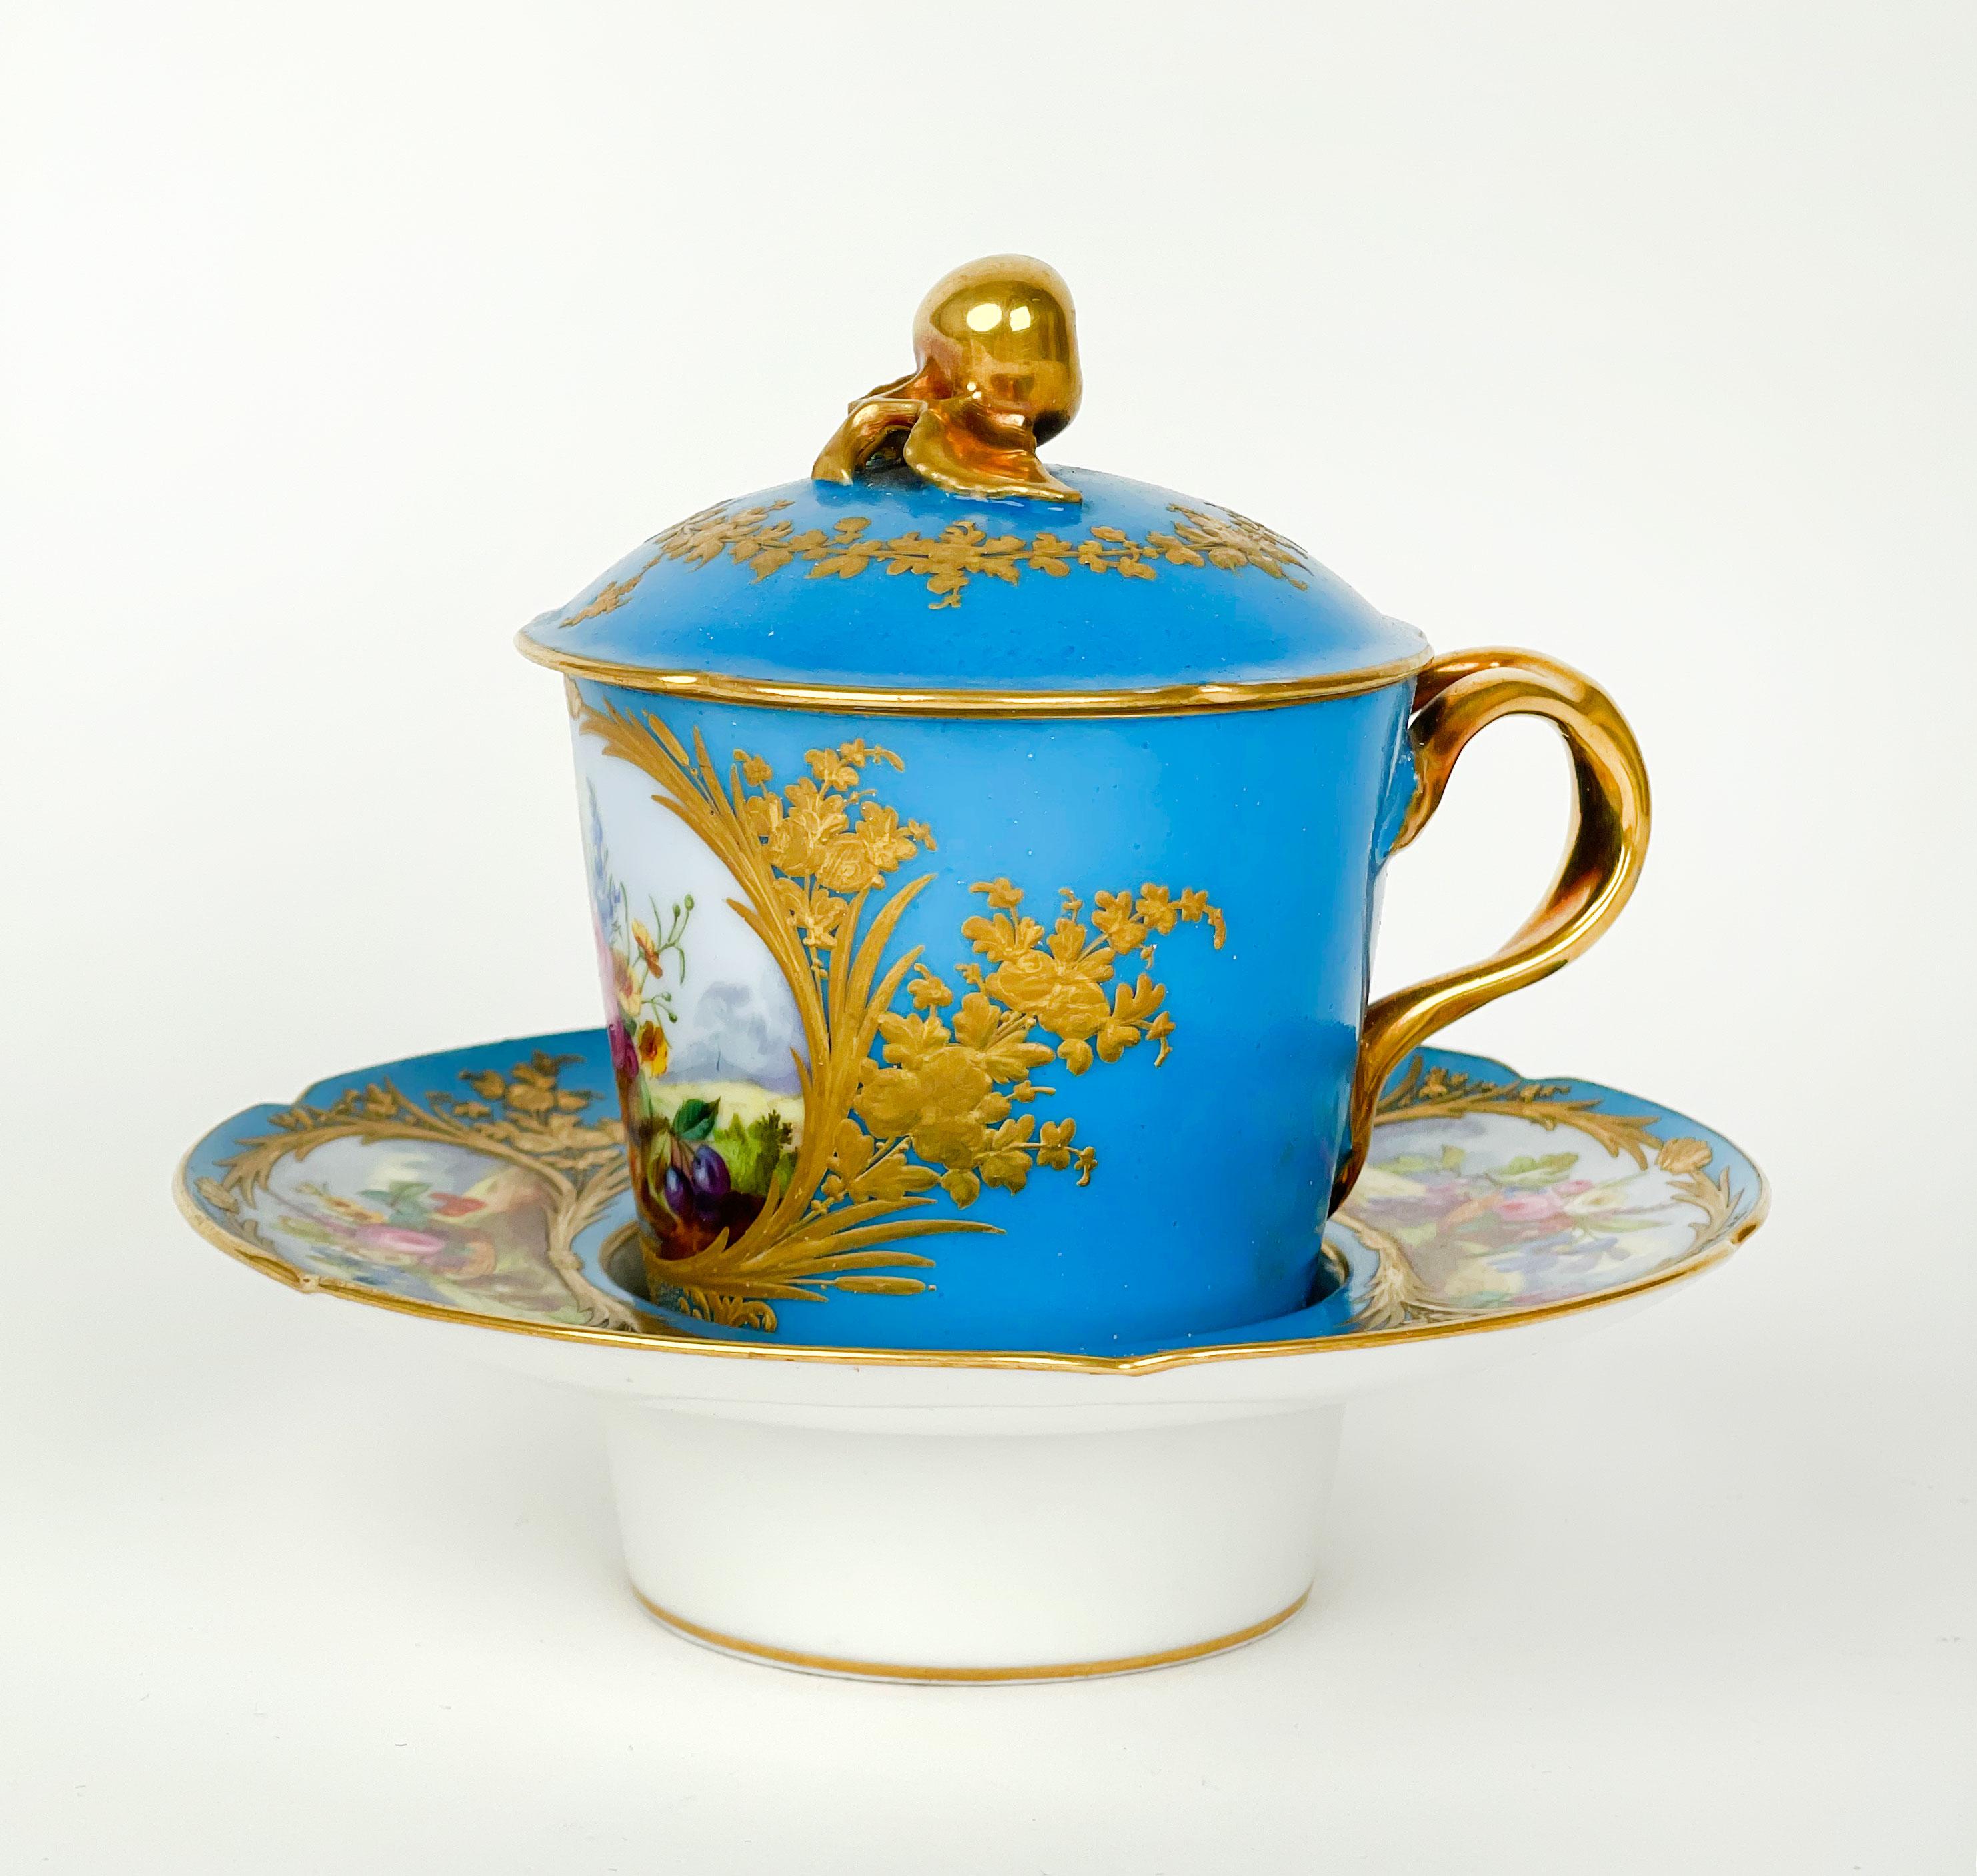 Hand-Crafted 18th Century French Sevres Porcelain Cup & Saucer